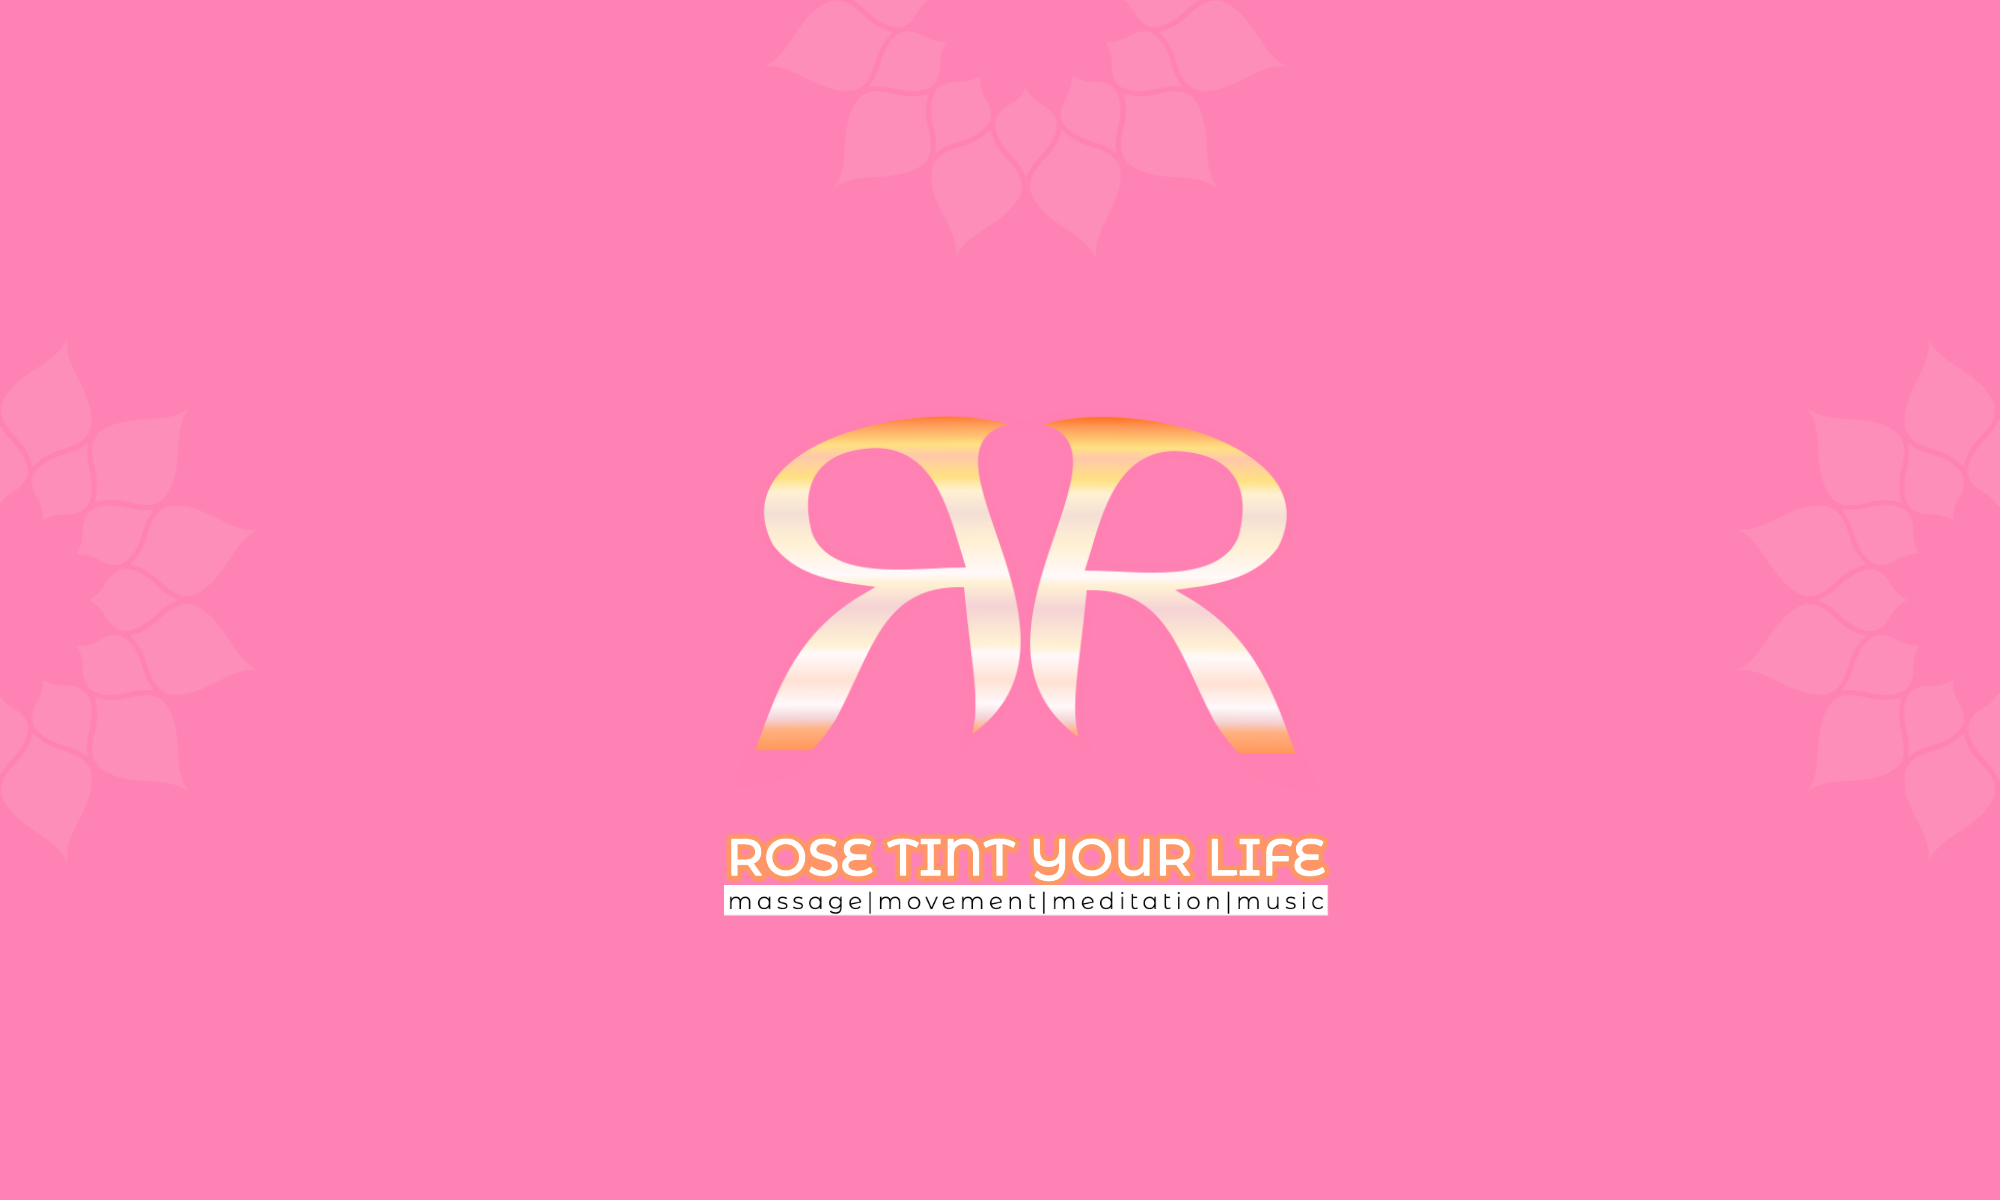 Rose Tint Your Life logo and pink banner with double R logo and the words massage, movement, meditation, music